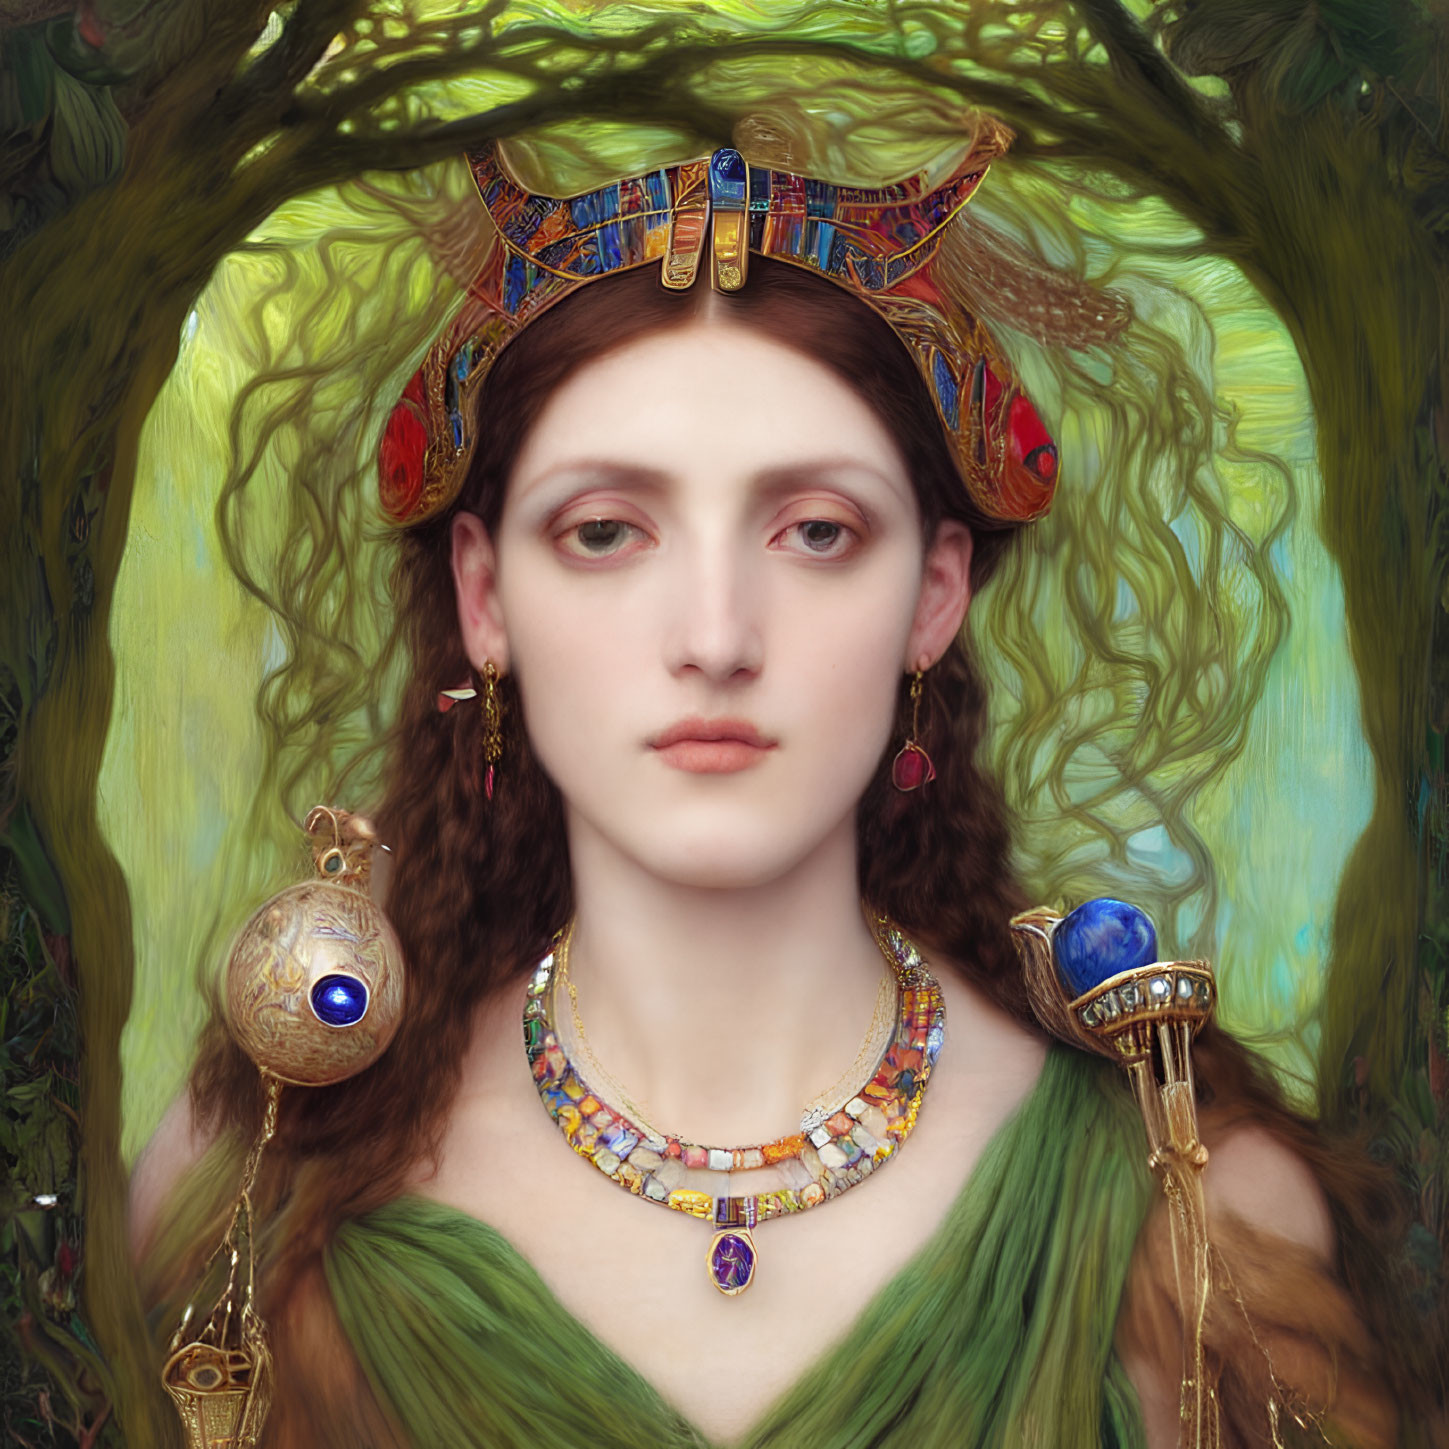 Portrait of Woman with Ornate Headdress and Jewelry in Natural Setting